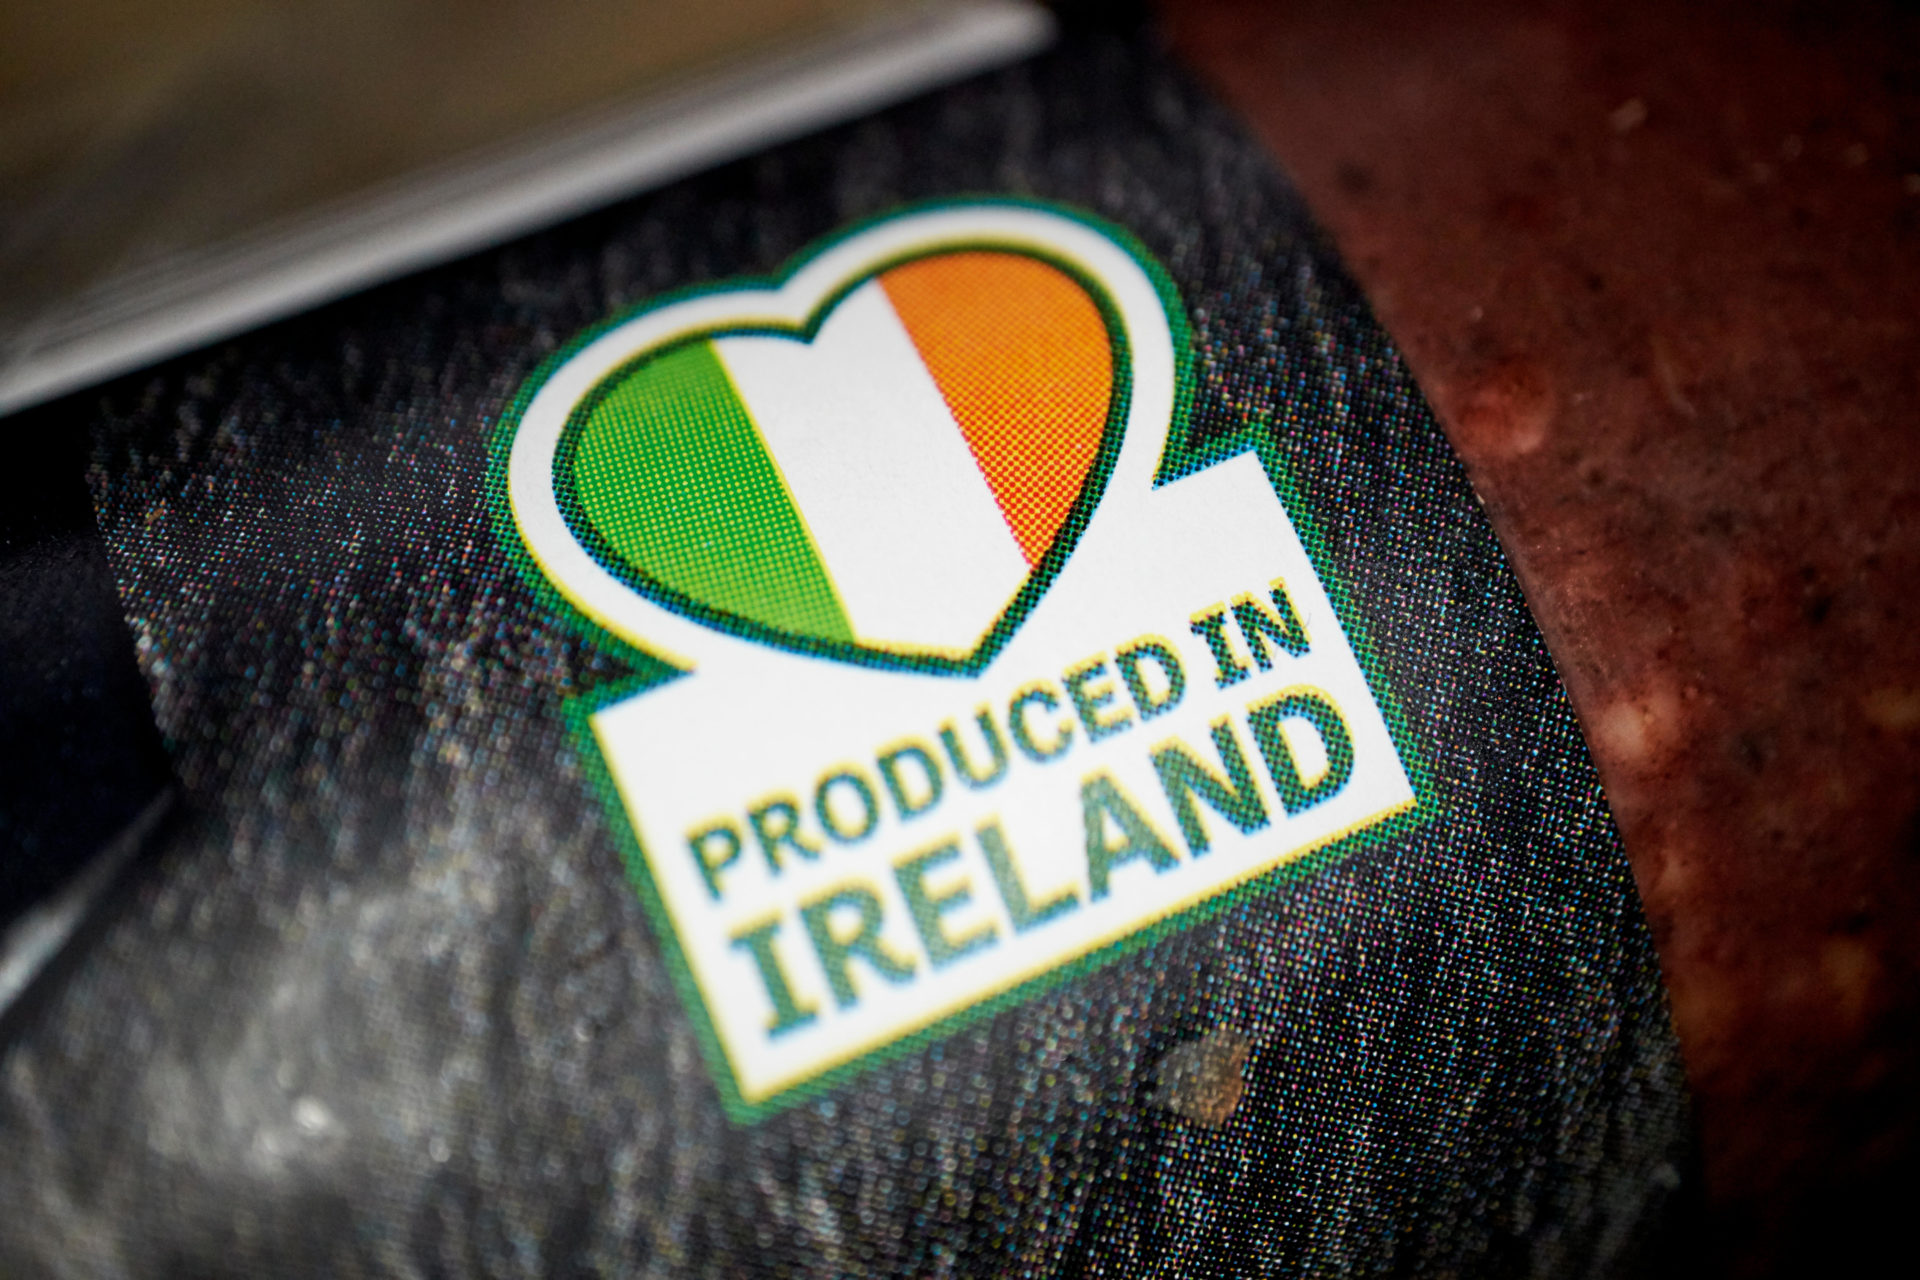 A Produced in Ireland label on own-brand food items